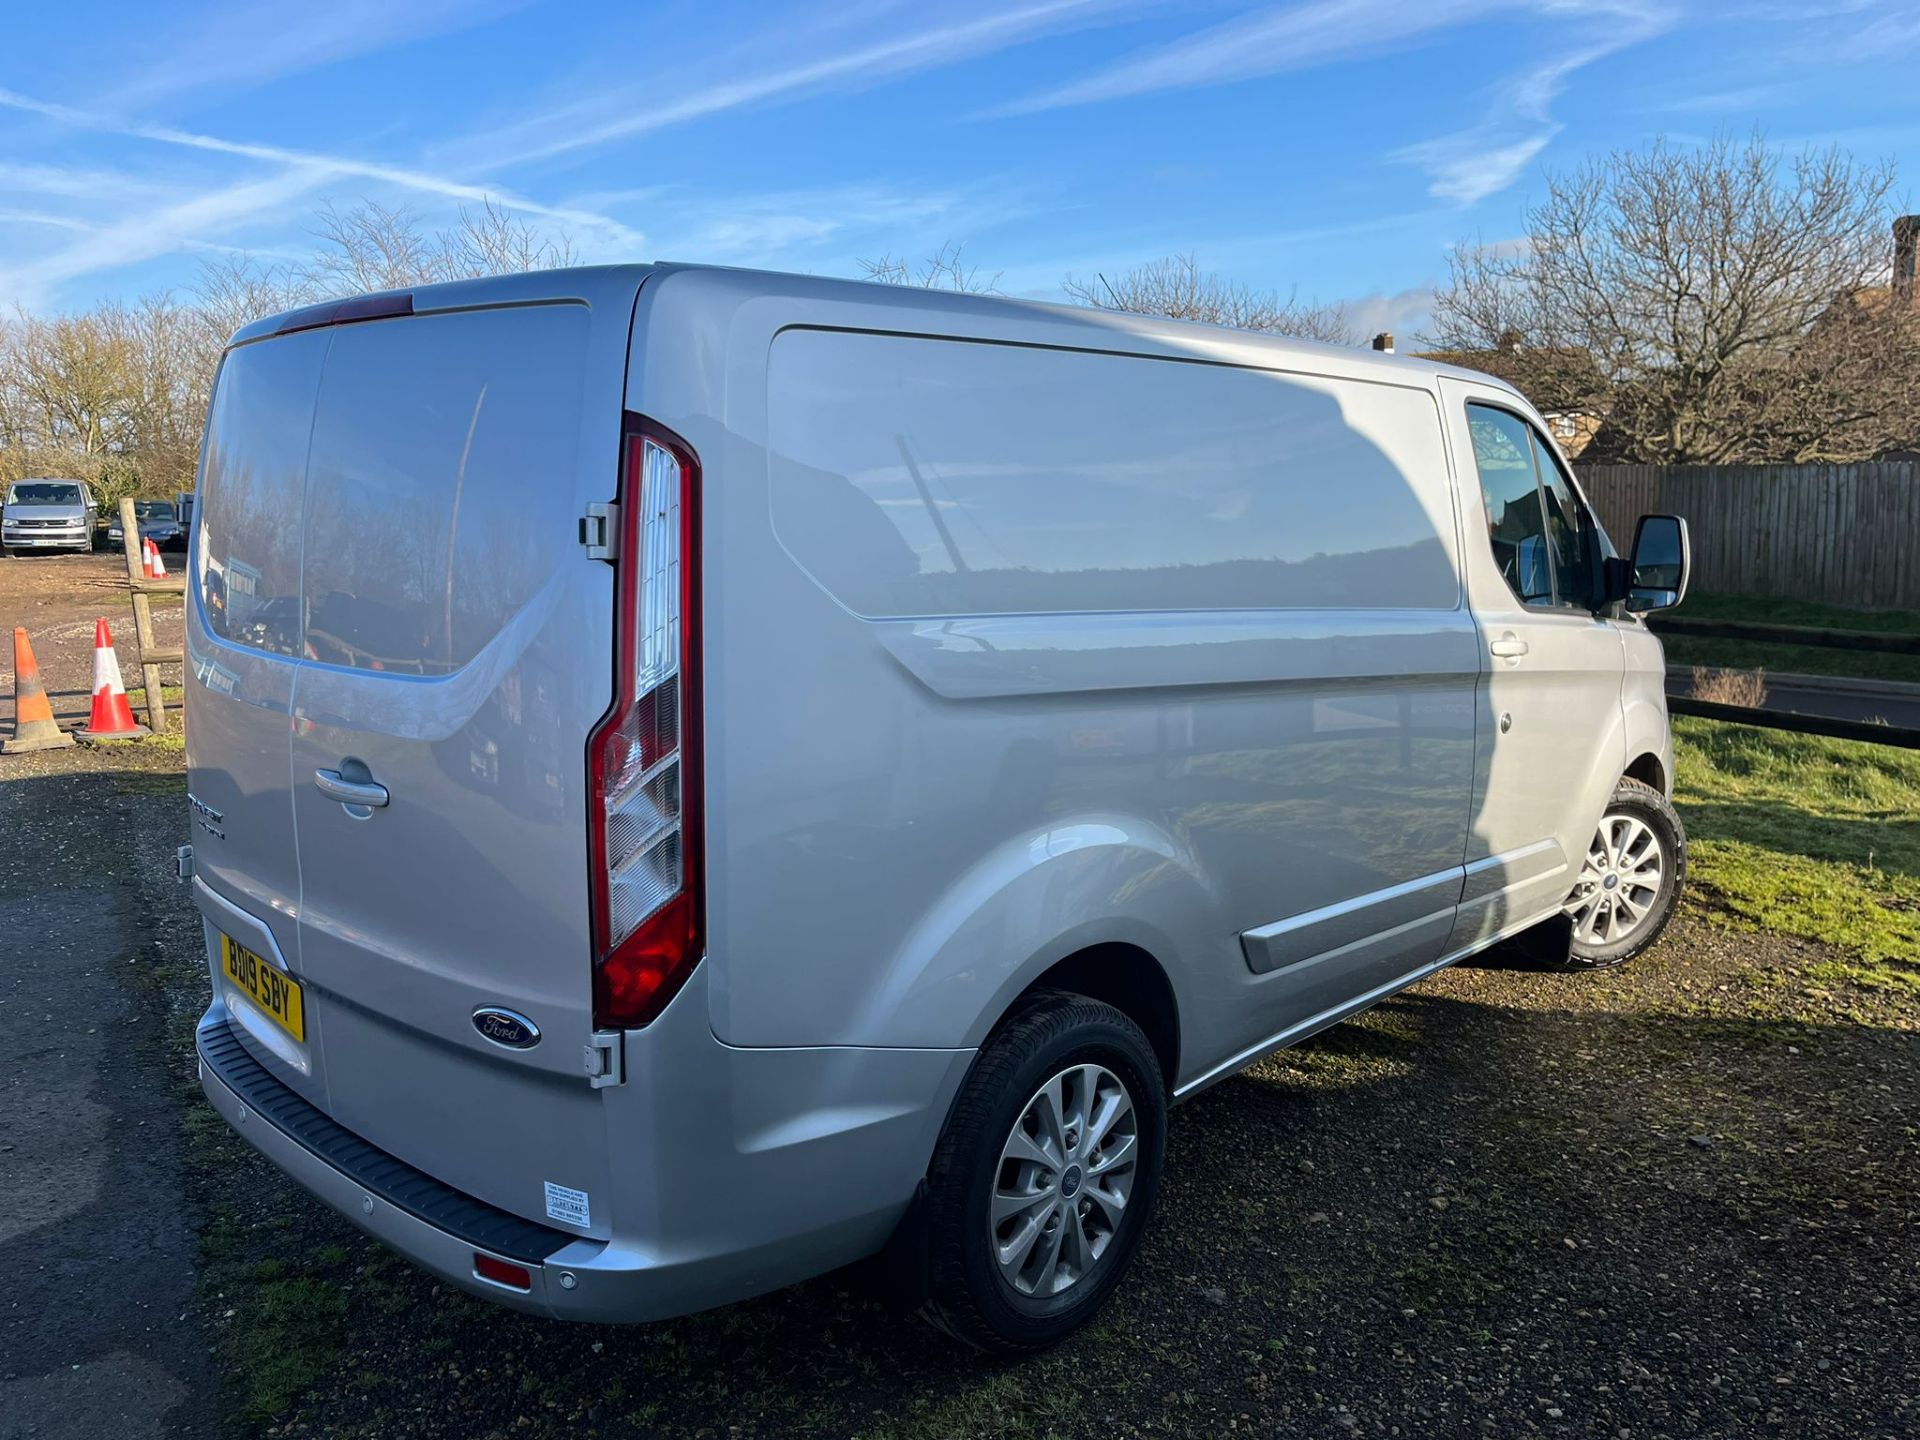 2019 FORD TRANSIT CUSTOM LIMITED MODEL PANEL VAN - L1H1 - EURO 6 AD BLUE - FSH - BD19 SBY - Image 3 of 14